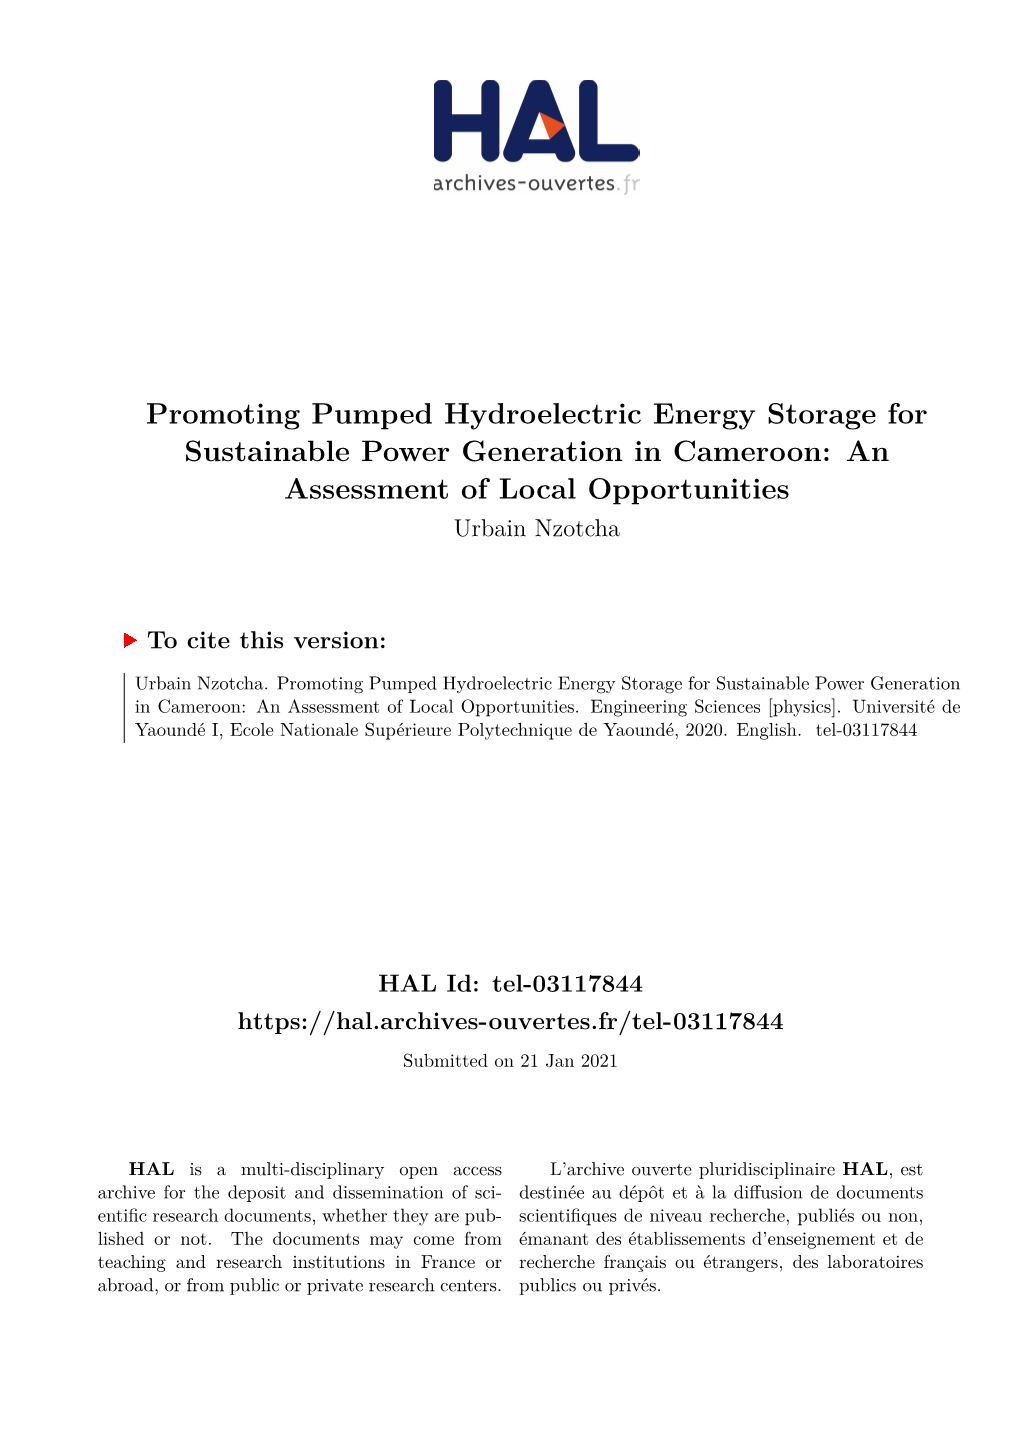 Promoting Pumped Hydroelectric Energy Storage for Sustainable Power Generation in Cameroon: an Assessment of Local Opportunities Urbain Nzotcha